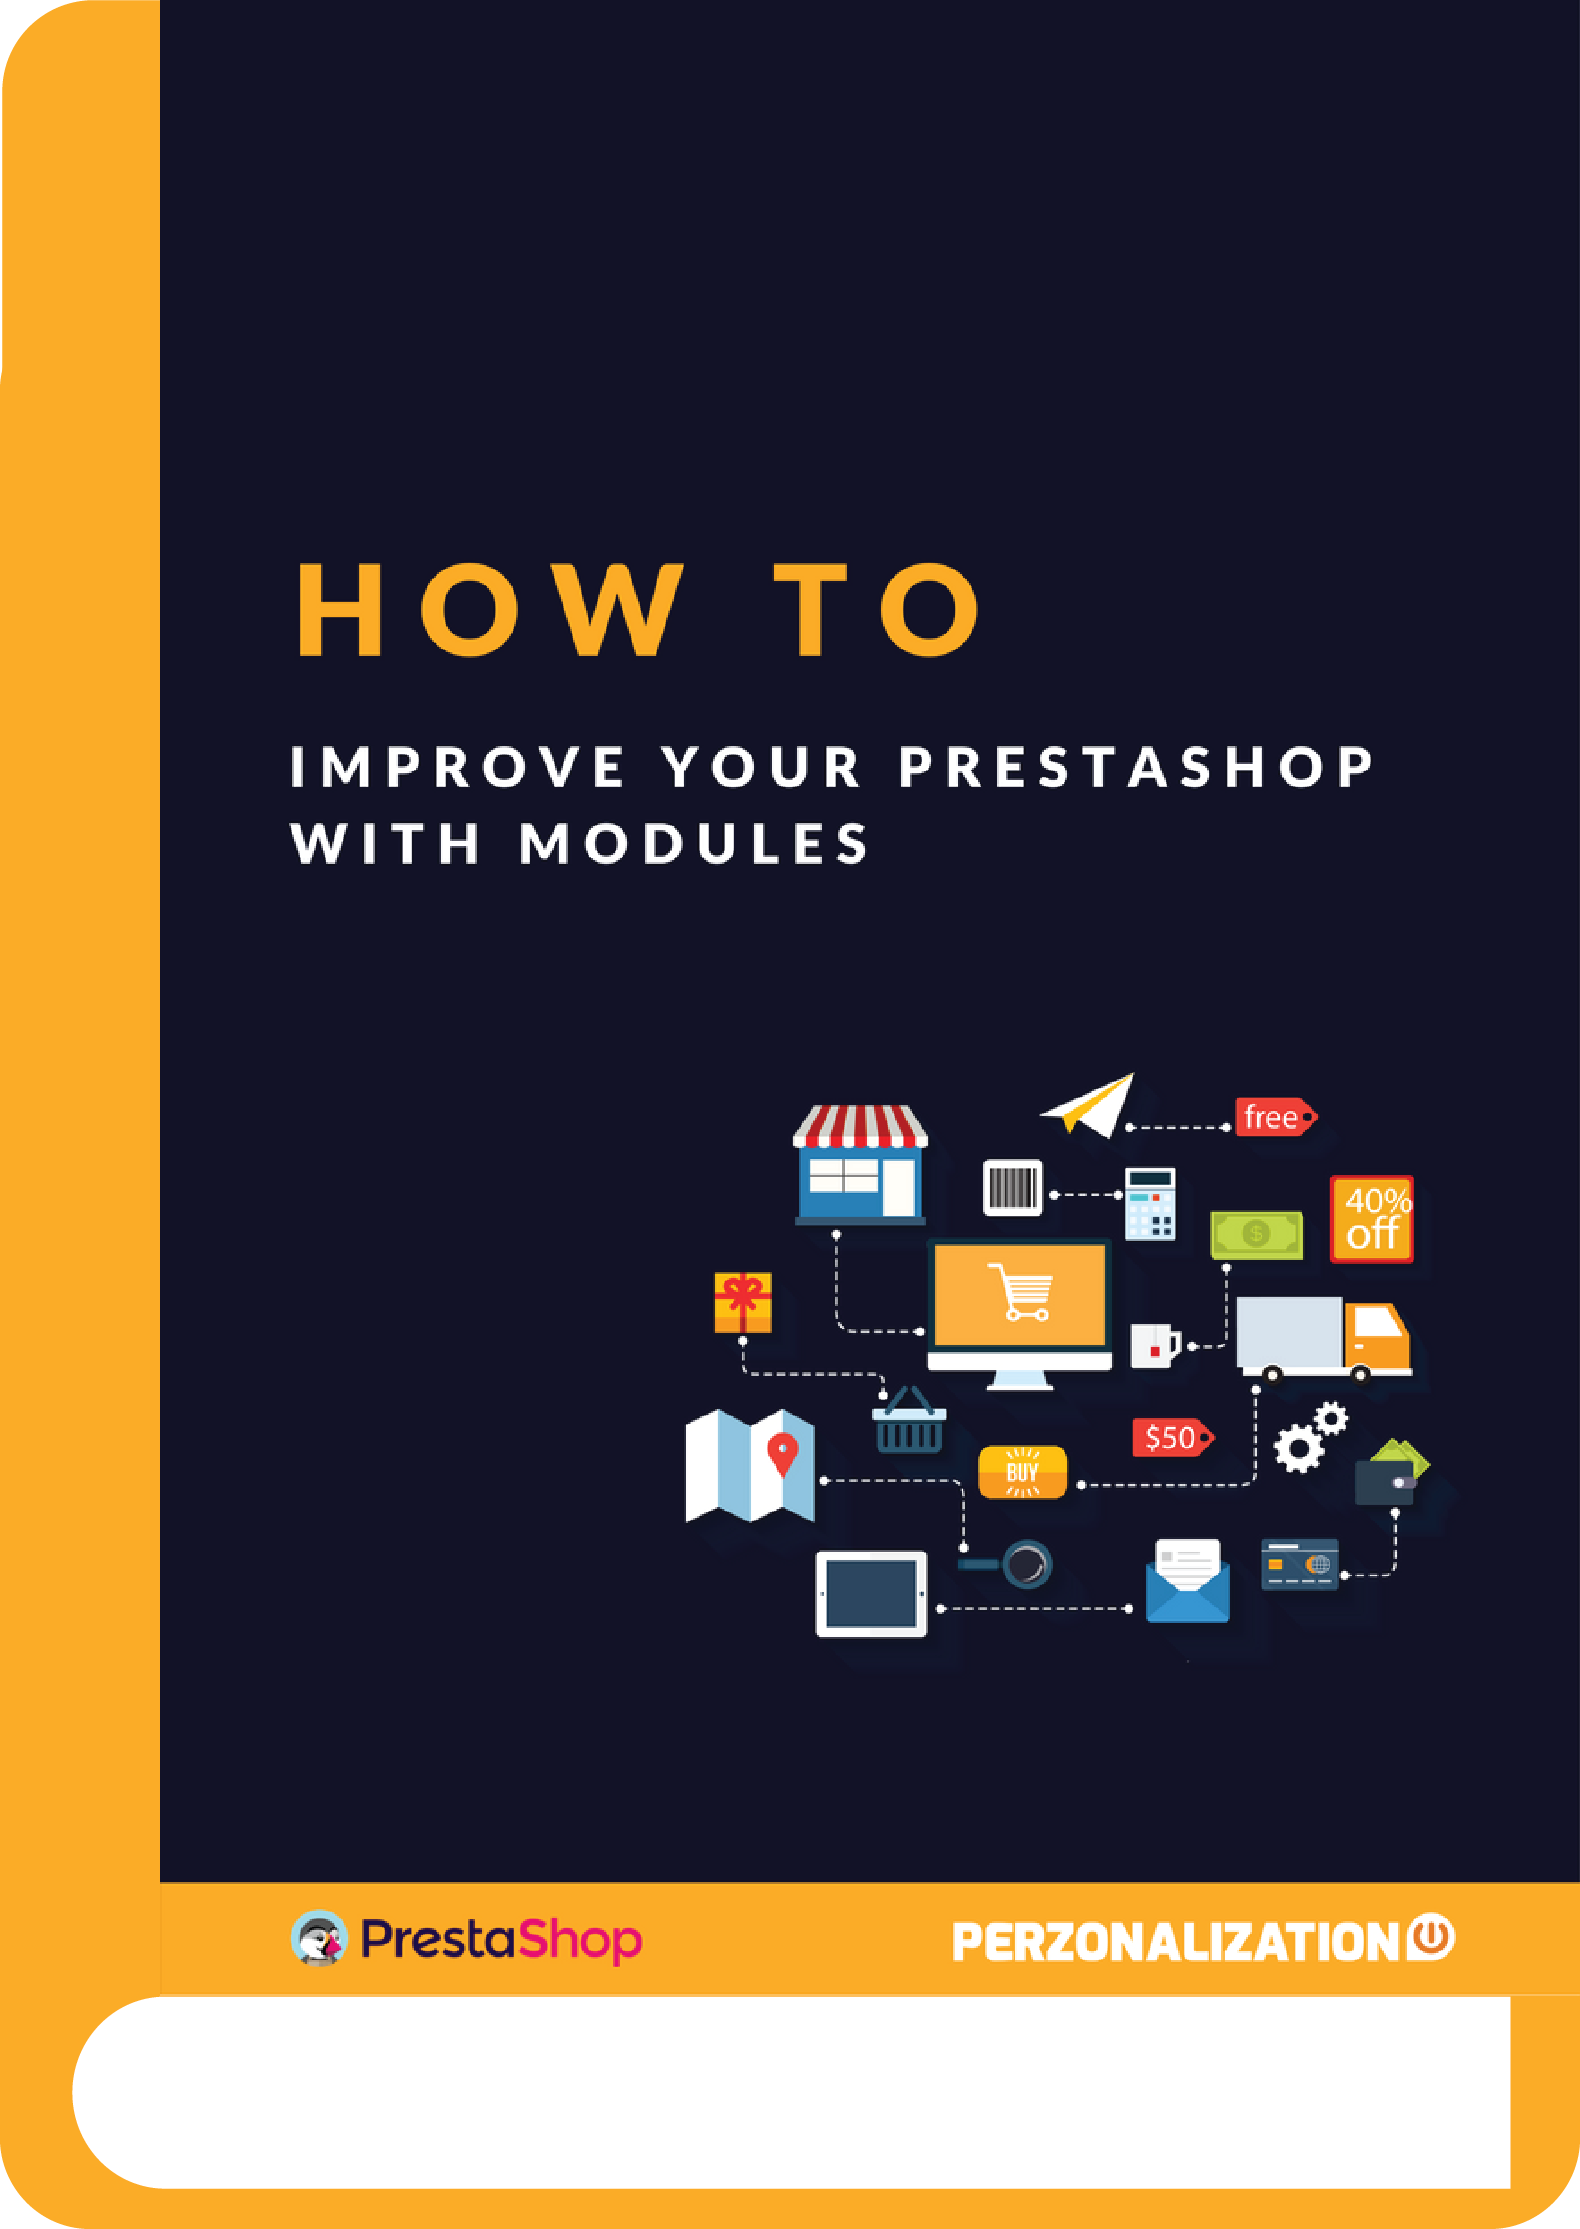 PrestaShop Modules should be your first thought when you plan to have your own e-commerce store just for the sheer amount of capabilities these come with.